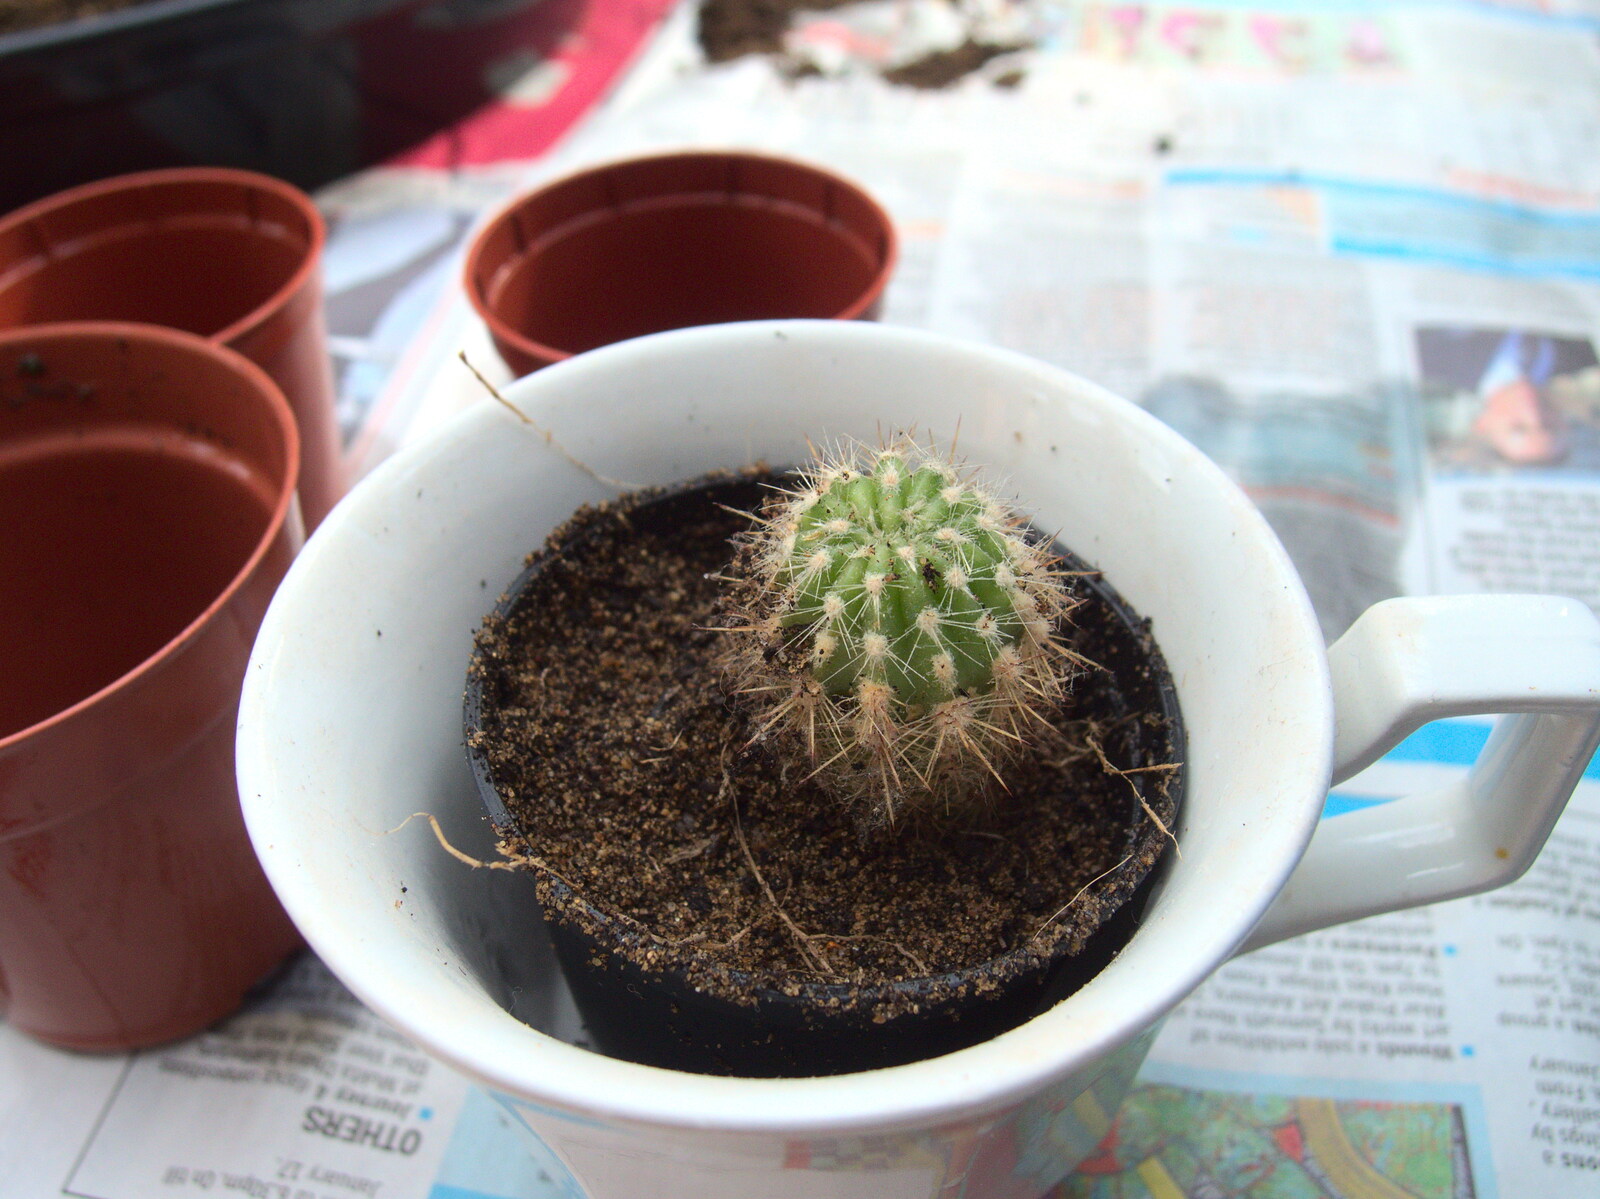 February Cactus Randomness, London and Brome, Suffolk - 14th February 2016: A new baby cactus in a pot